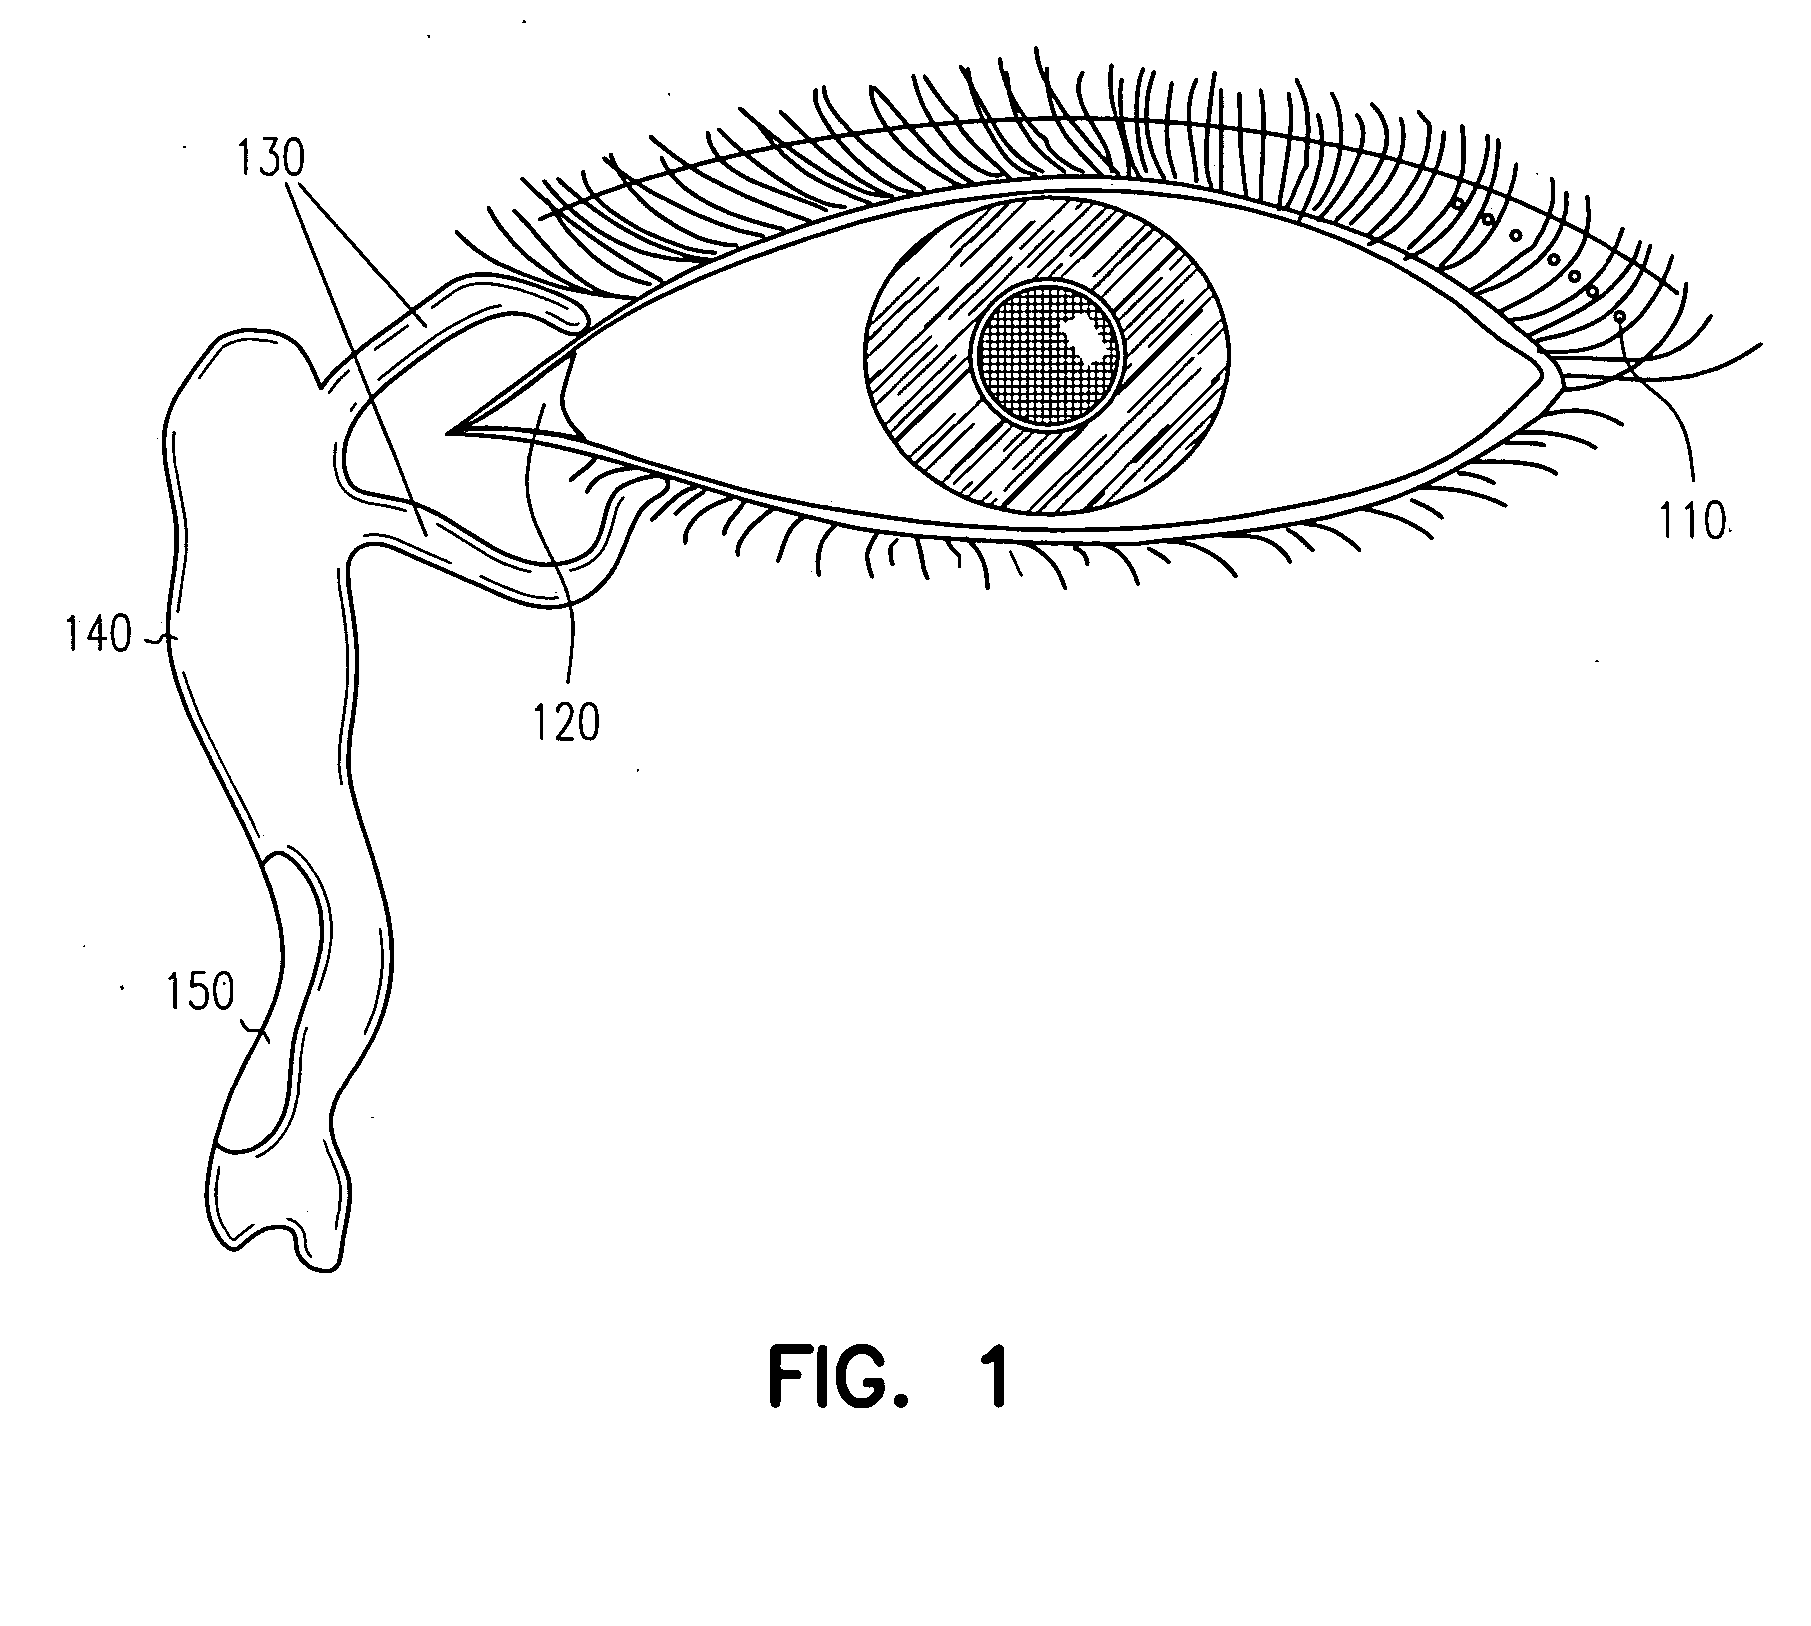 Adhesive bioerodible ocular drug delivery system